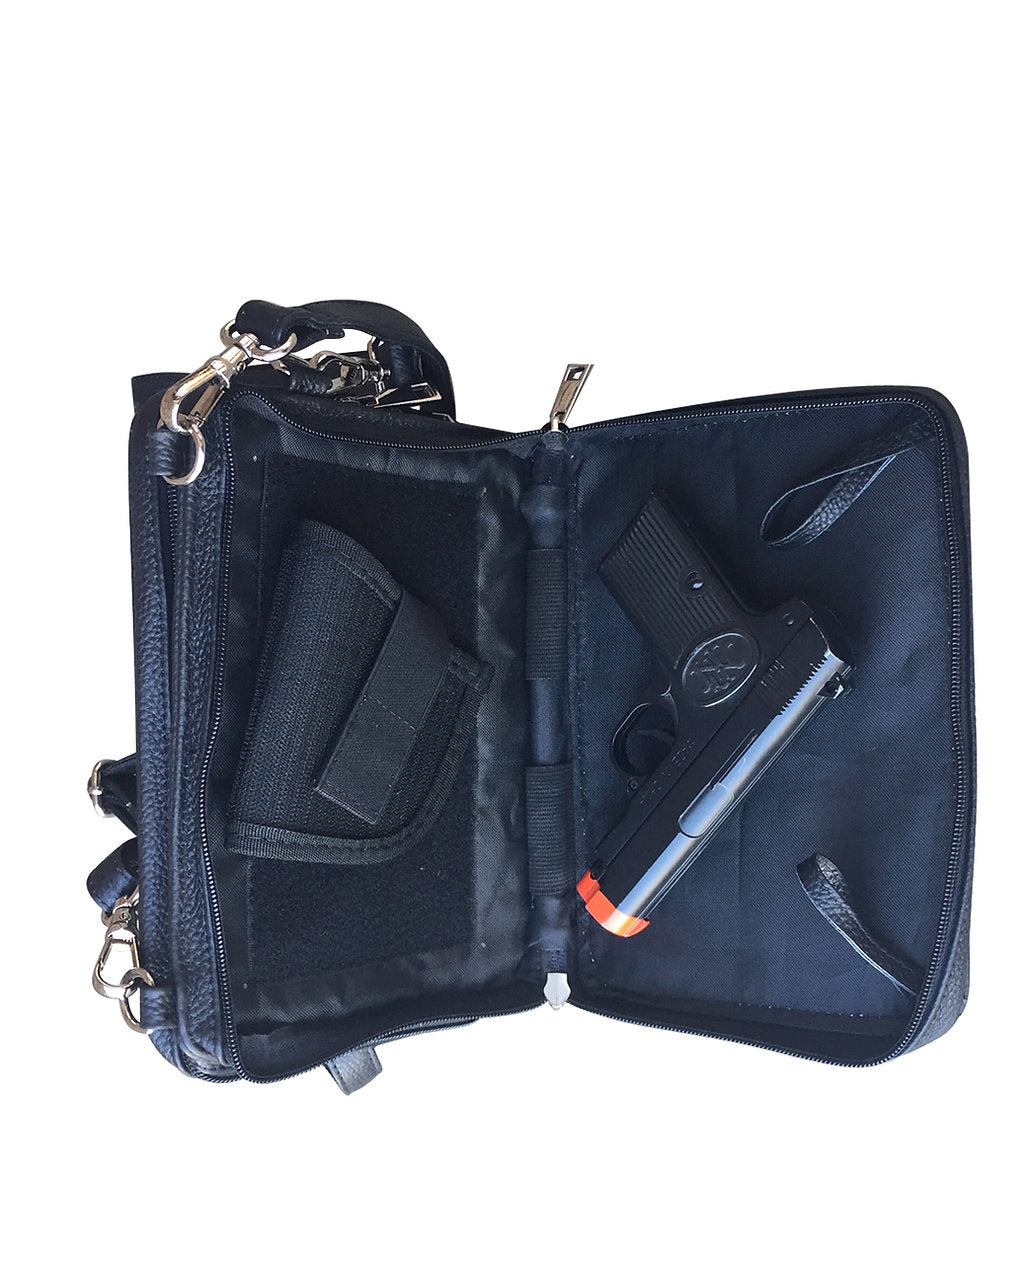 NEW Dual Compartment Leather Conceal Carry Wristlet to Crossbody Organizer - Hiding Hilda, LLC